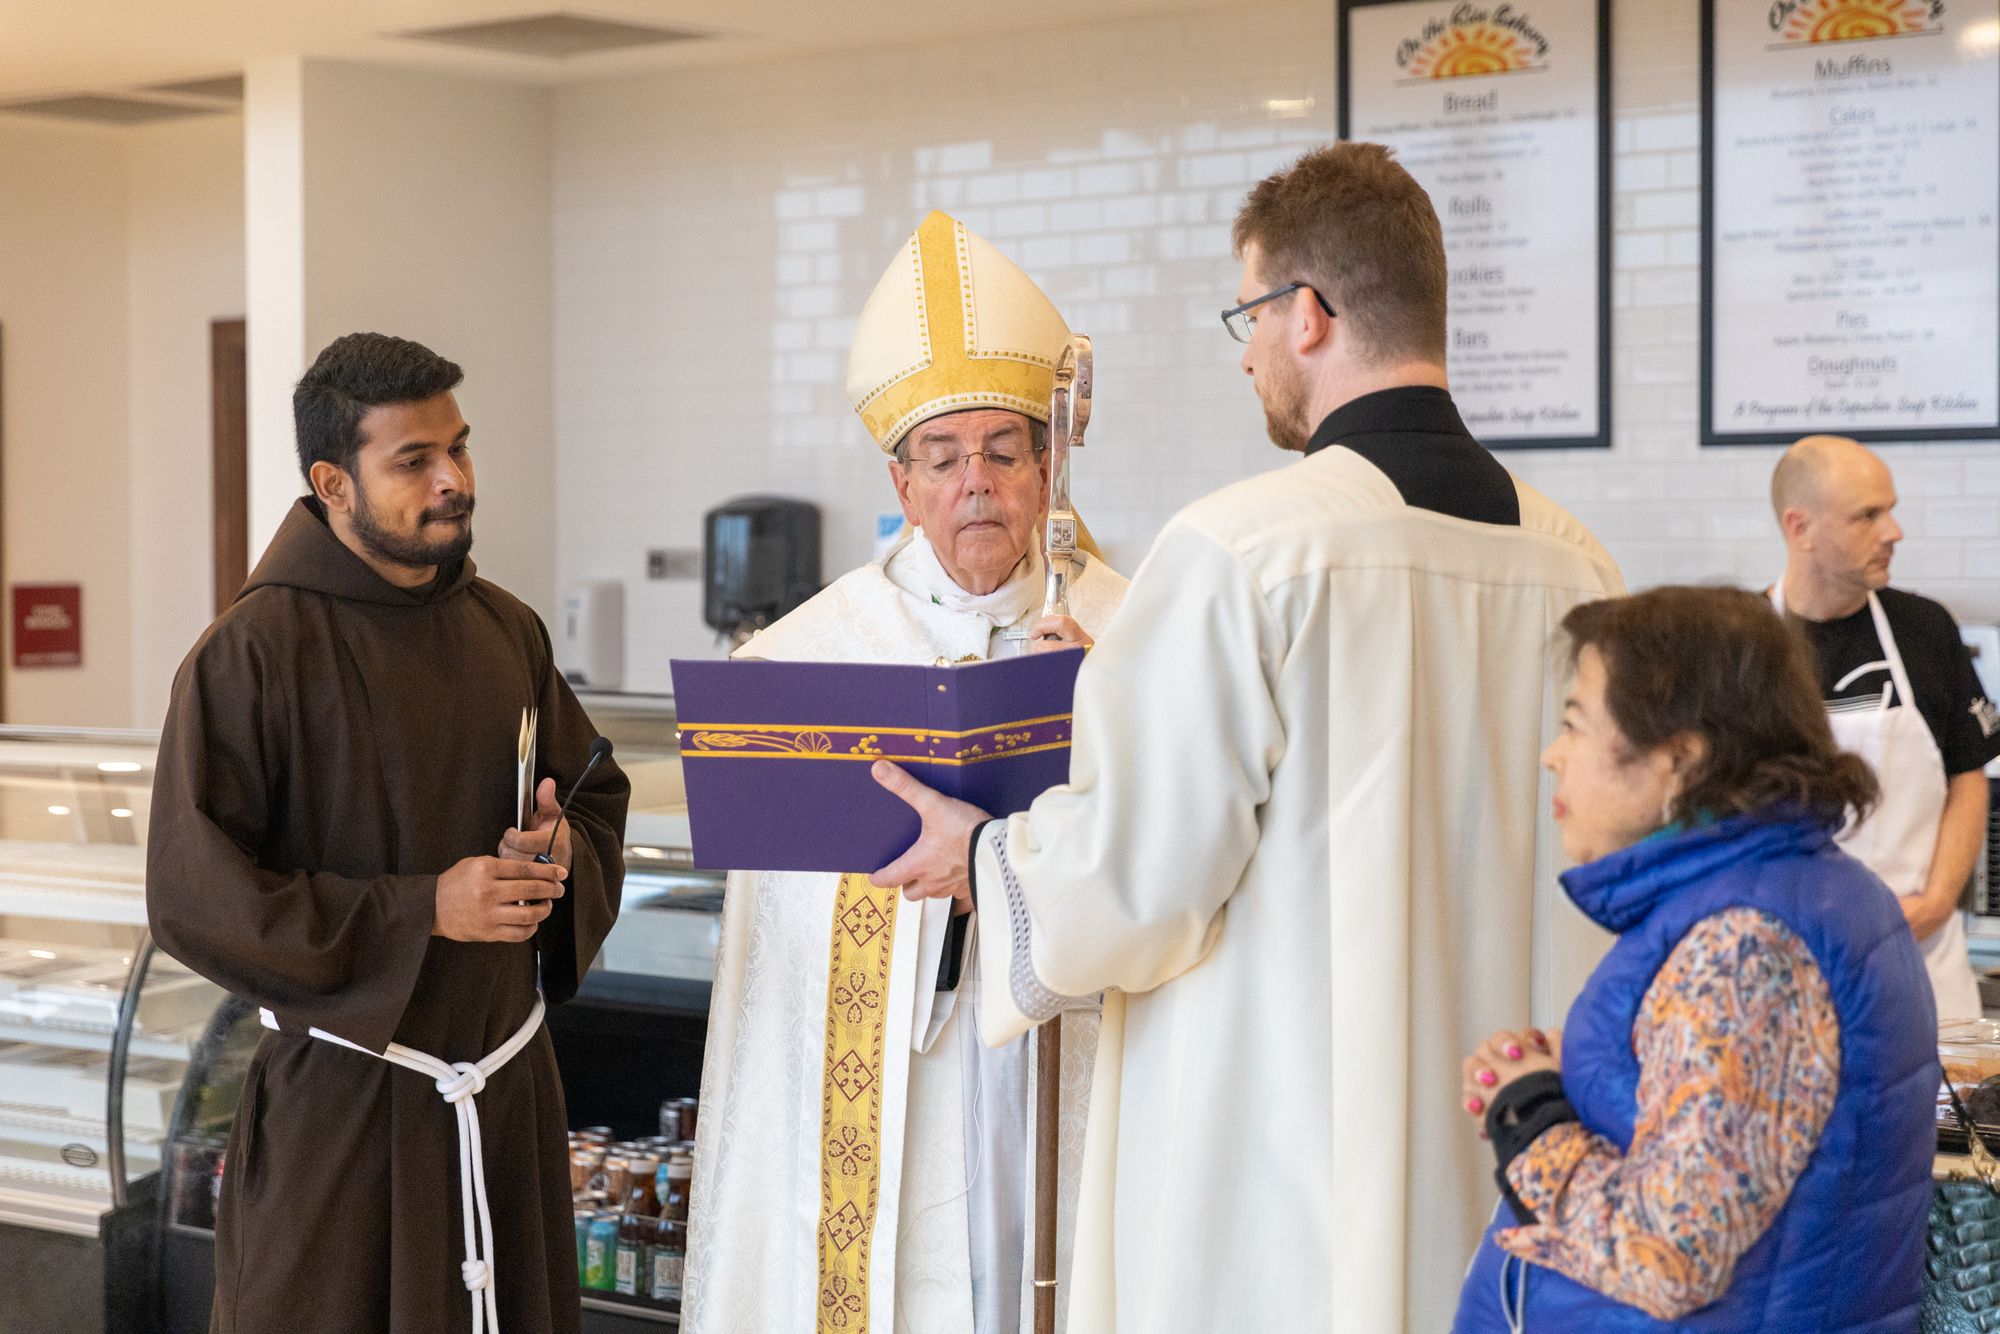 Archbishop offers a blessing in the new café.